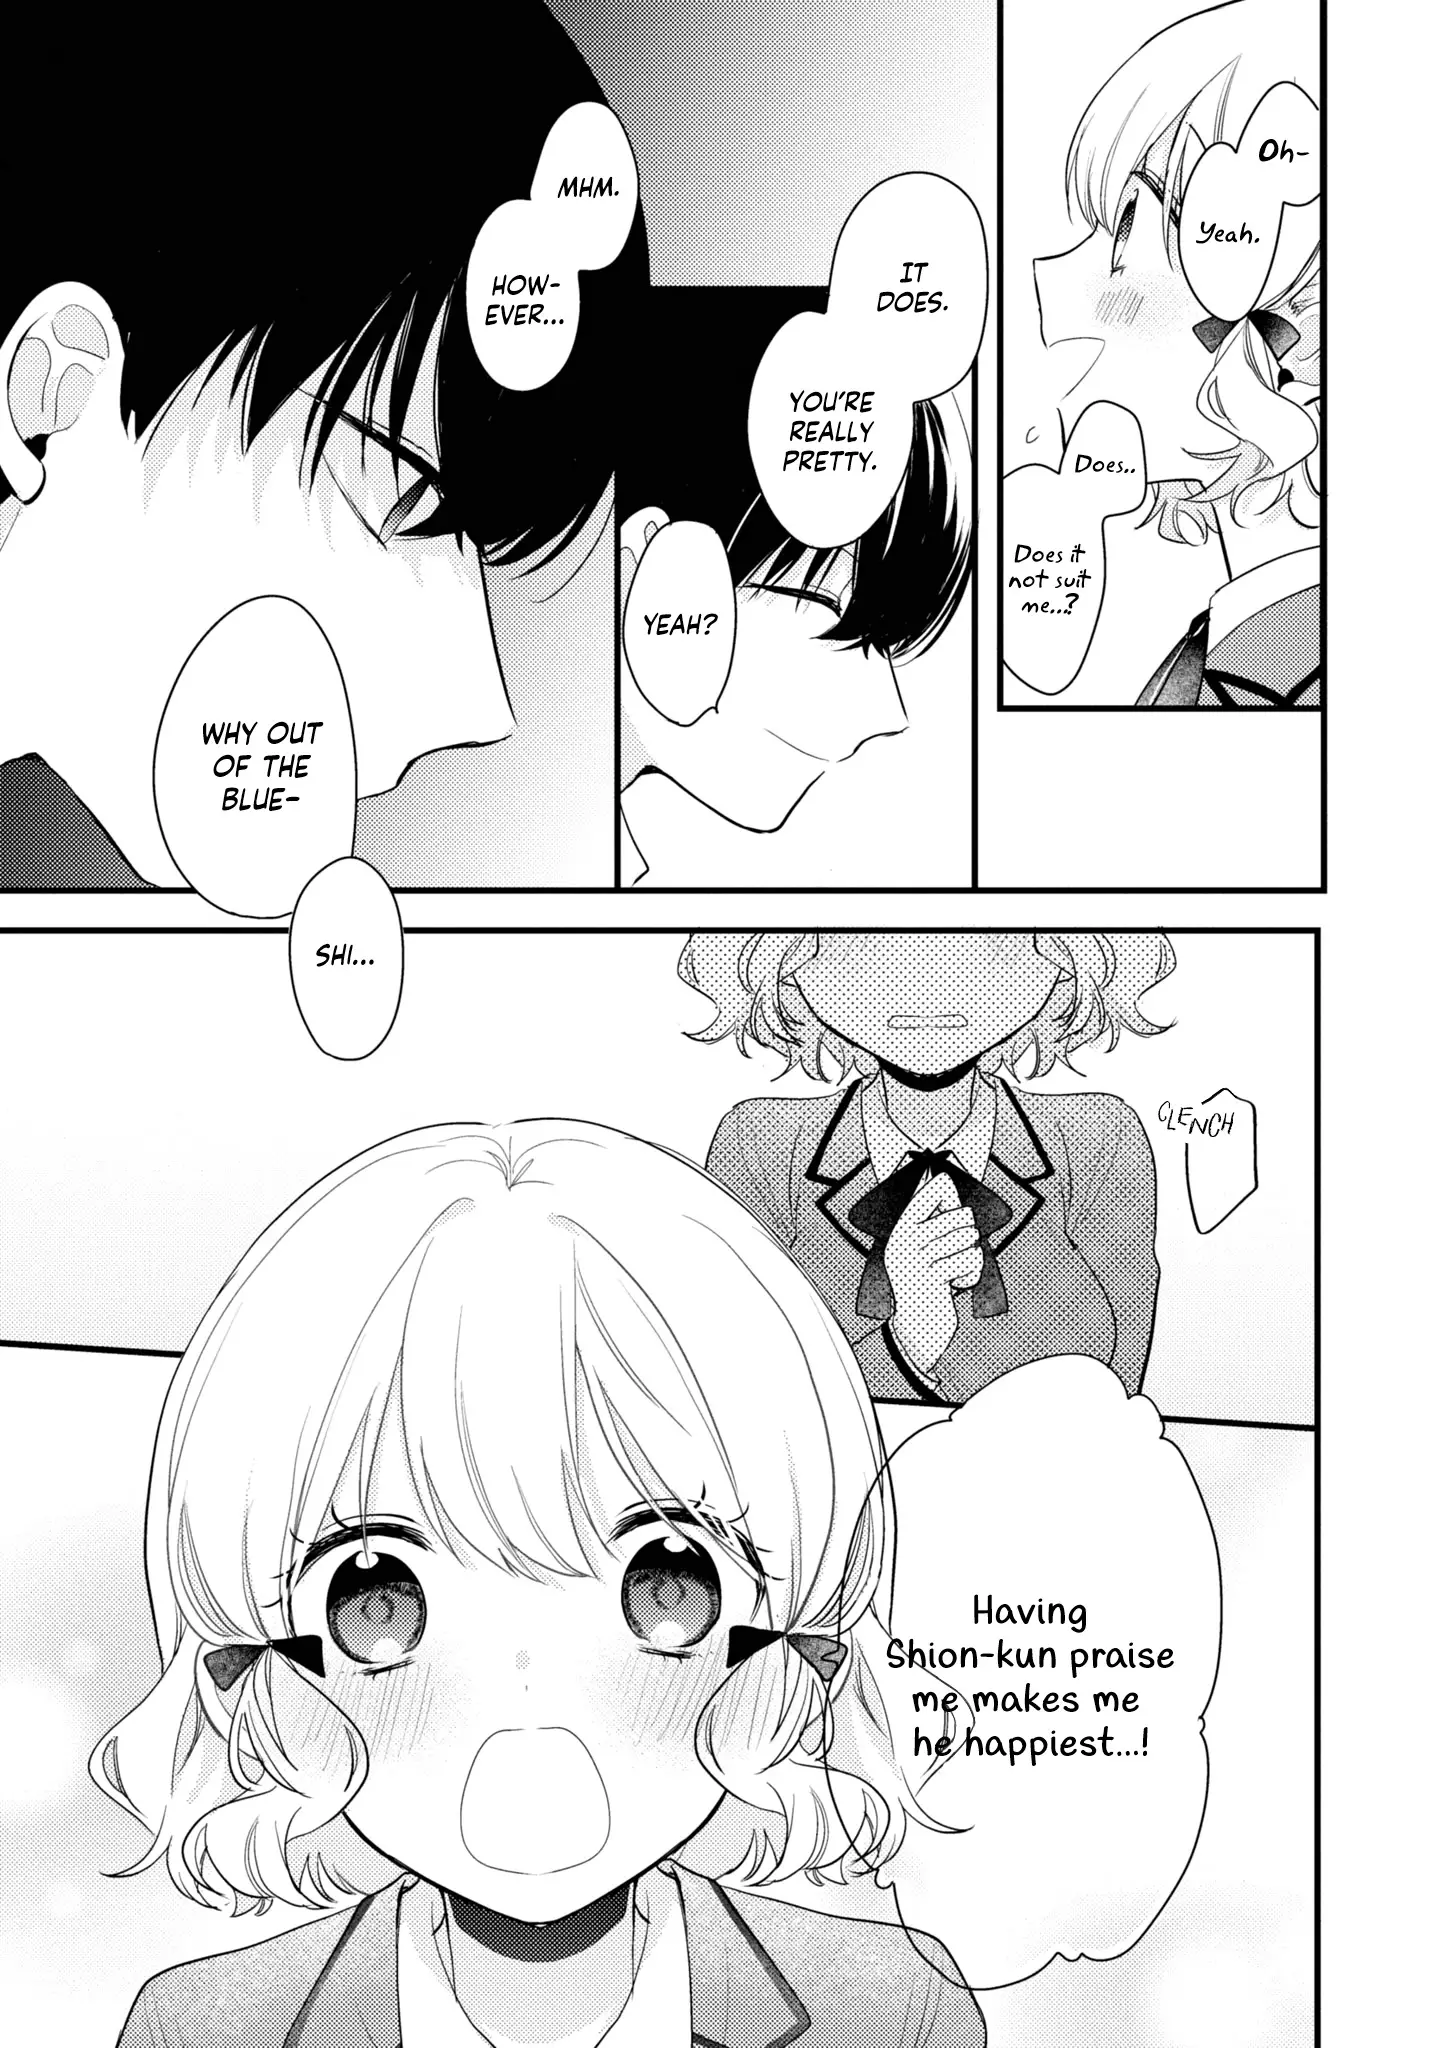 I Have A Second Chance At Life, So I’Ll Pamper My Yandere Boyfriend For A Happy Ending!! - 2 page 16-704c04c3